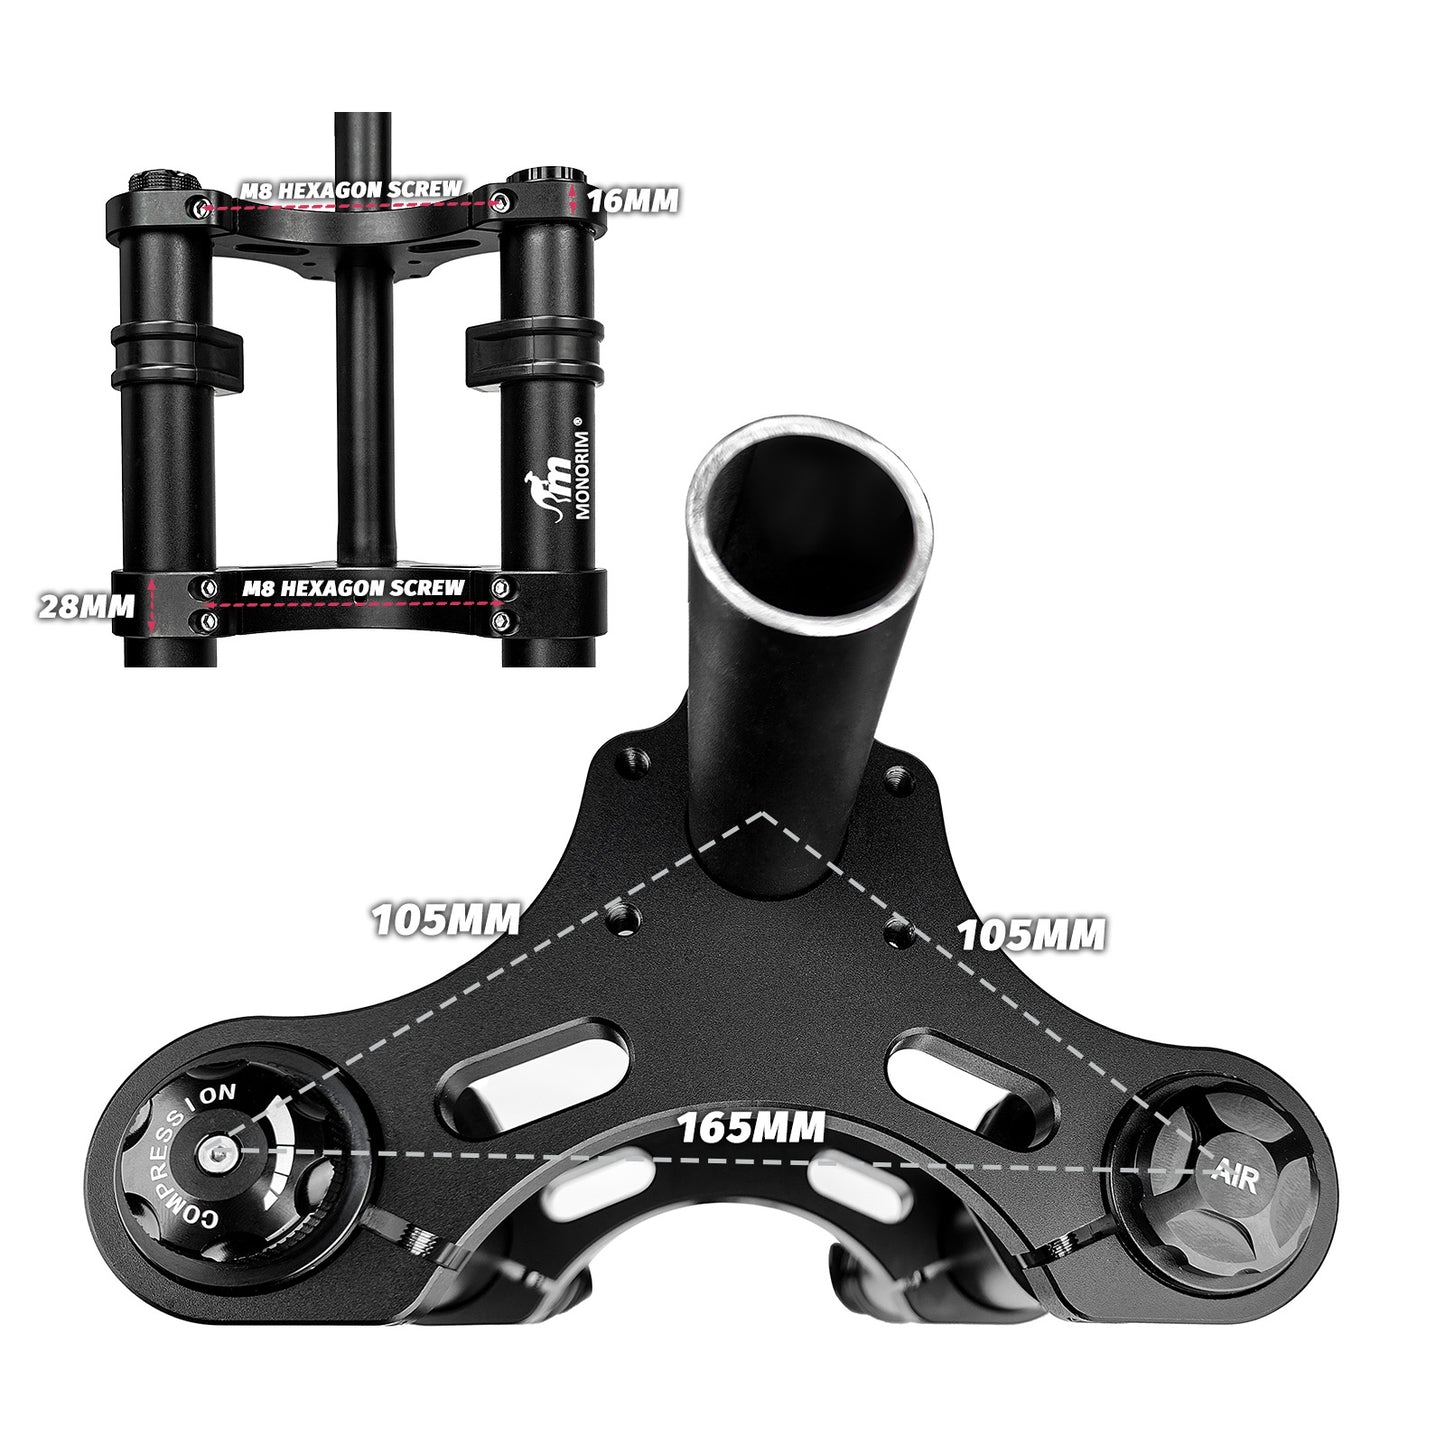 Monorim MD0-14inch front suspension modify great kit to be more safety and comfort for DYU D3+/ D3F ebike ：